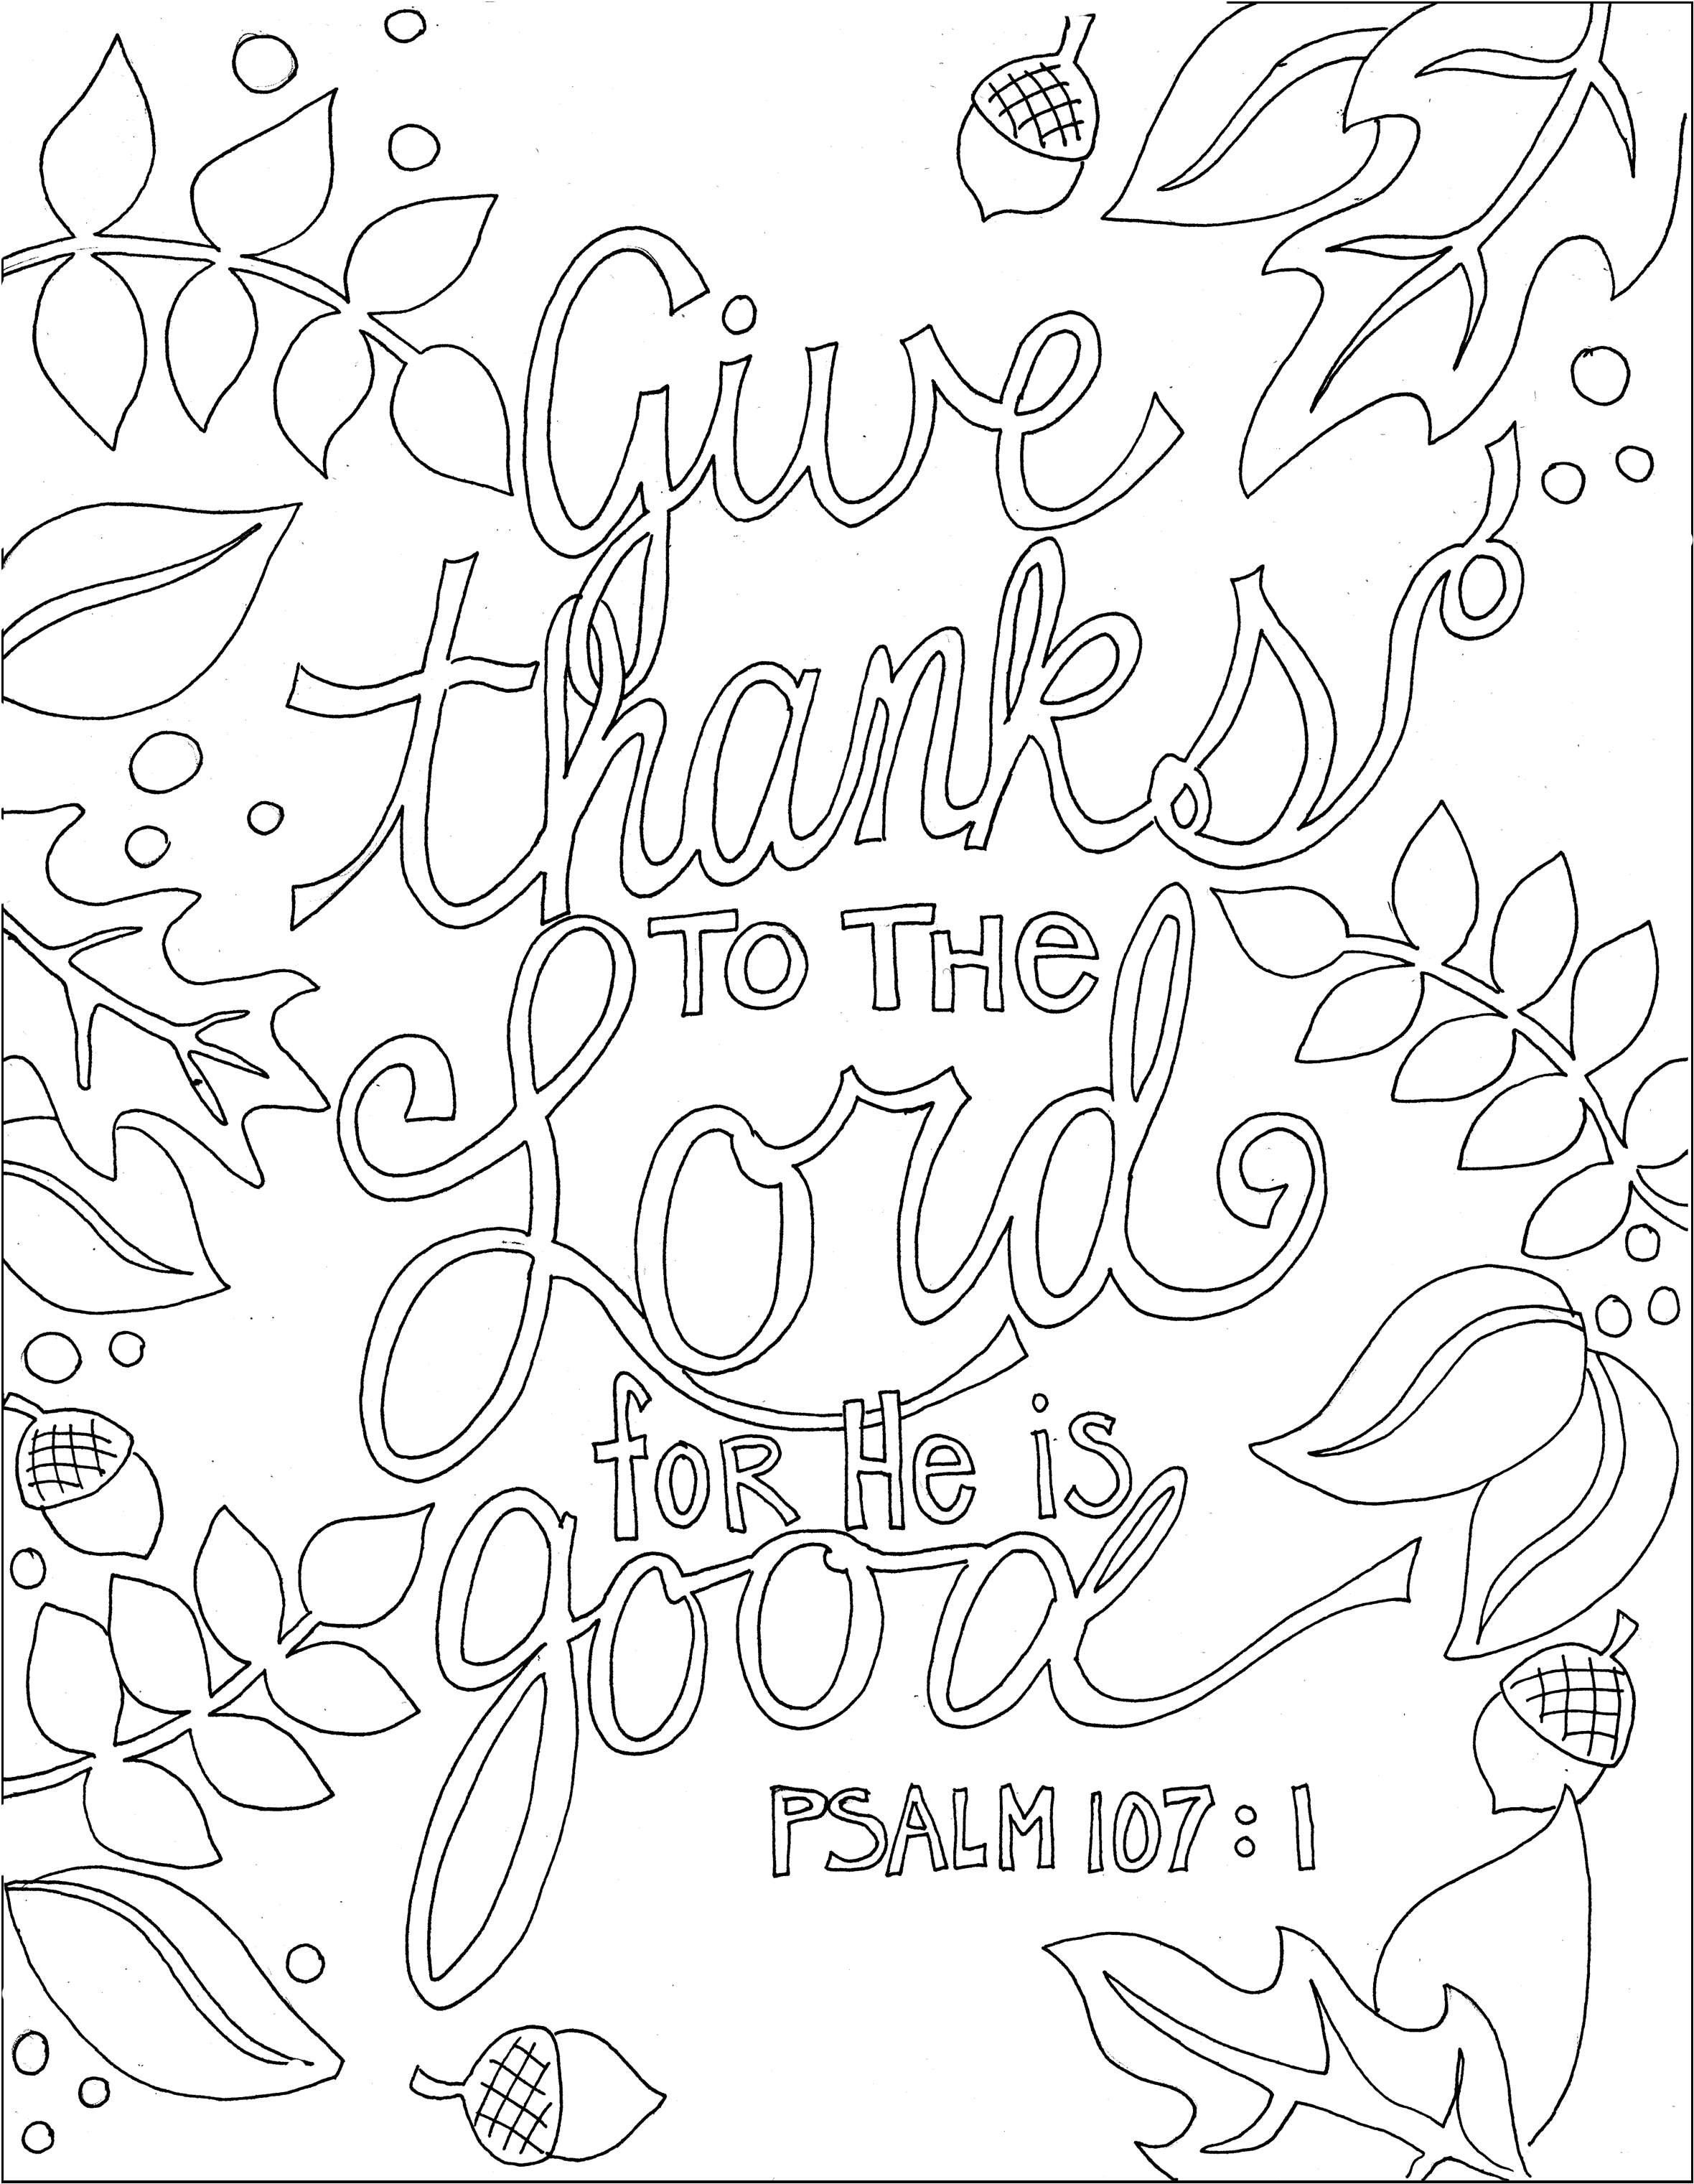 Top 21 Bible Coloring Pages For Kids With Verses Home Family Style And Art Ideas